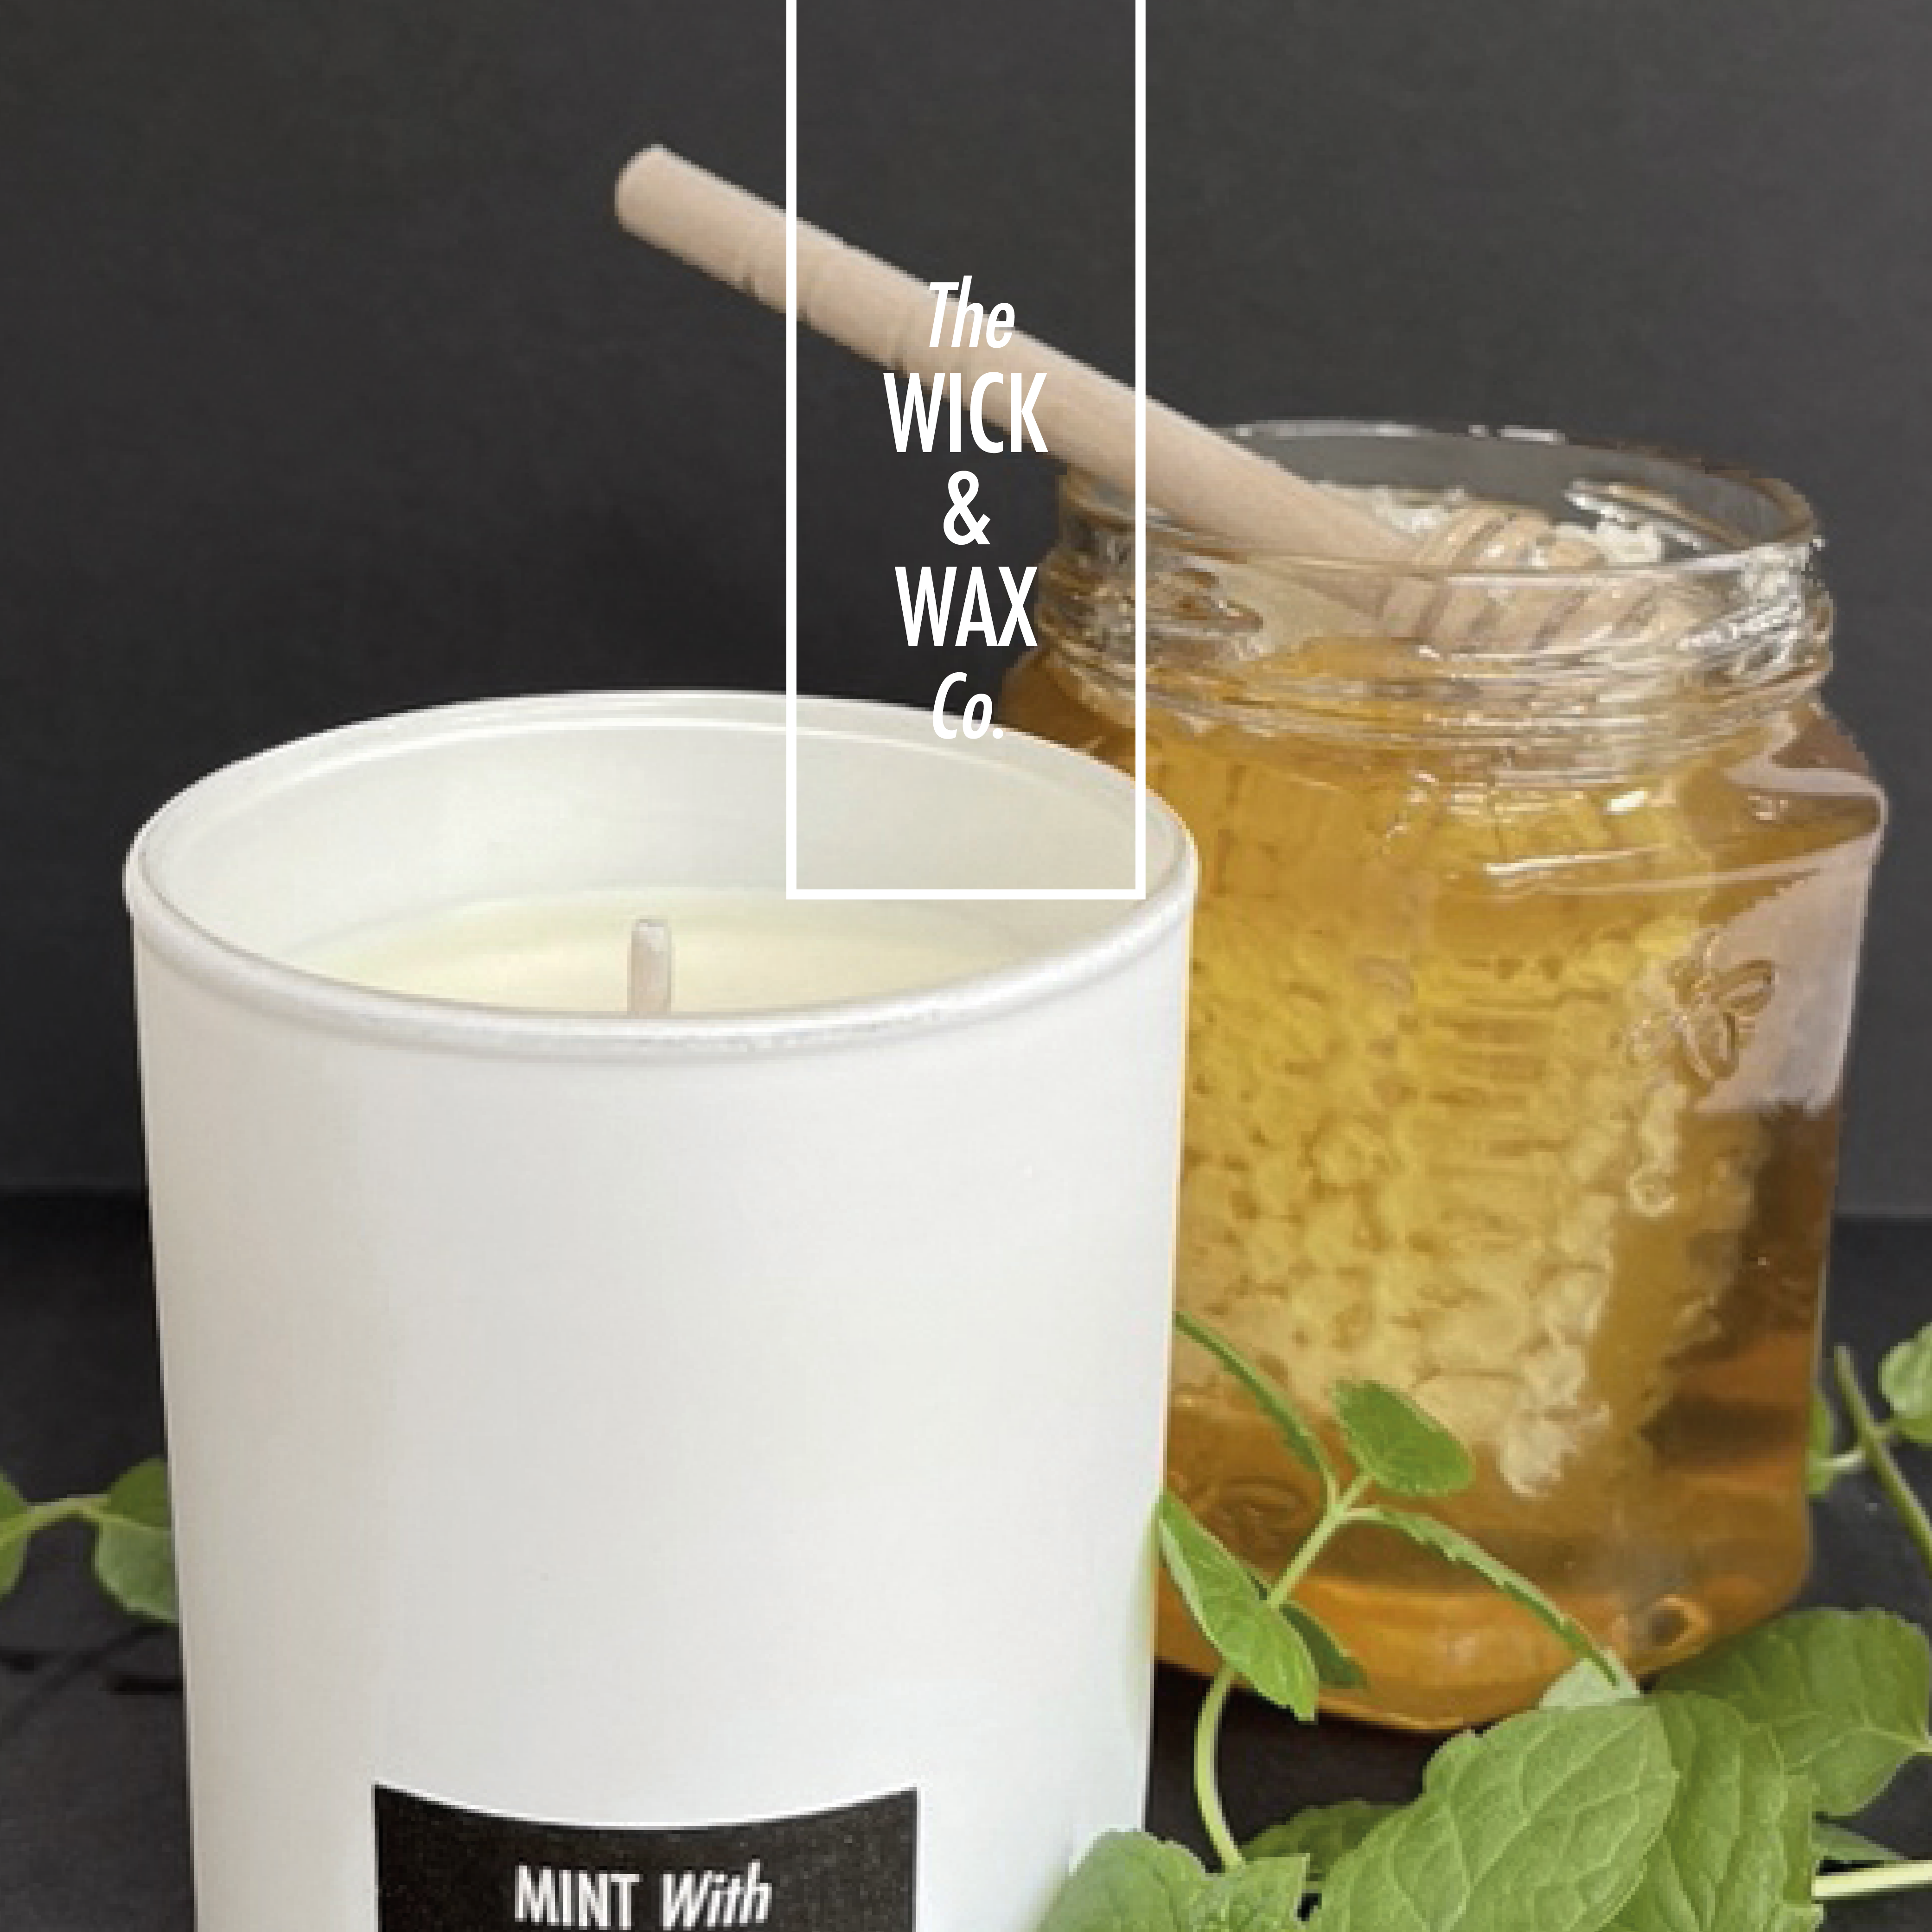 Mint With Honey - Scented Soy Candle